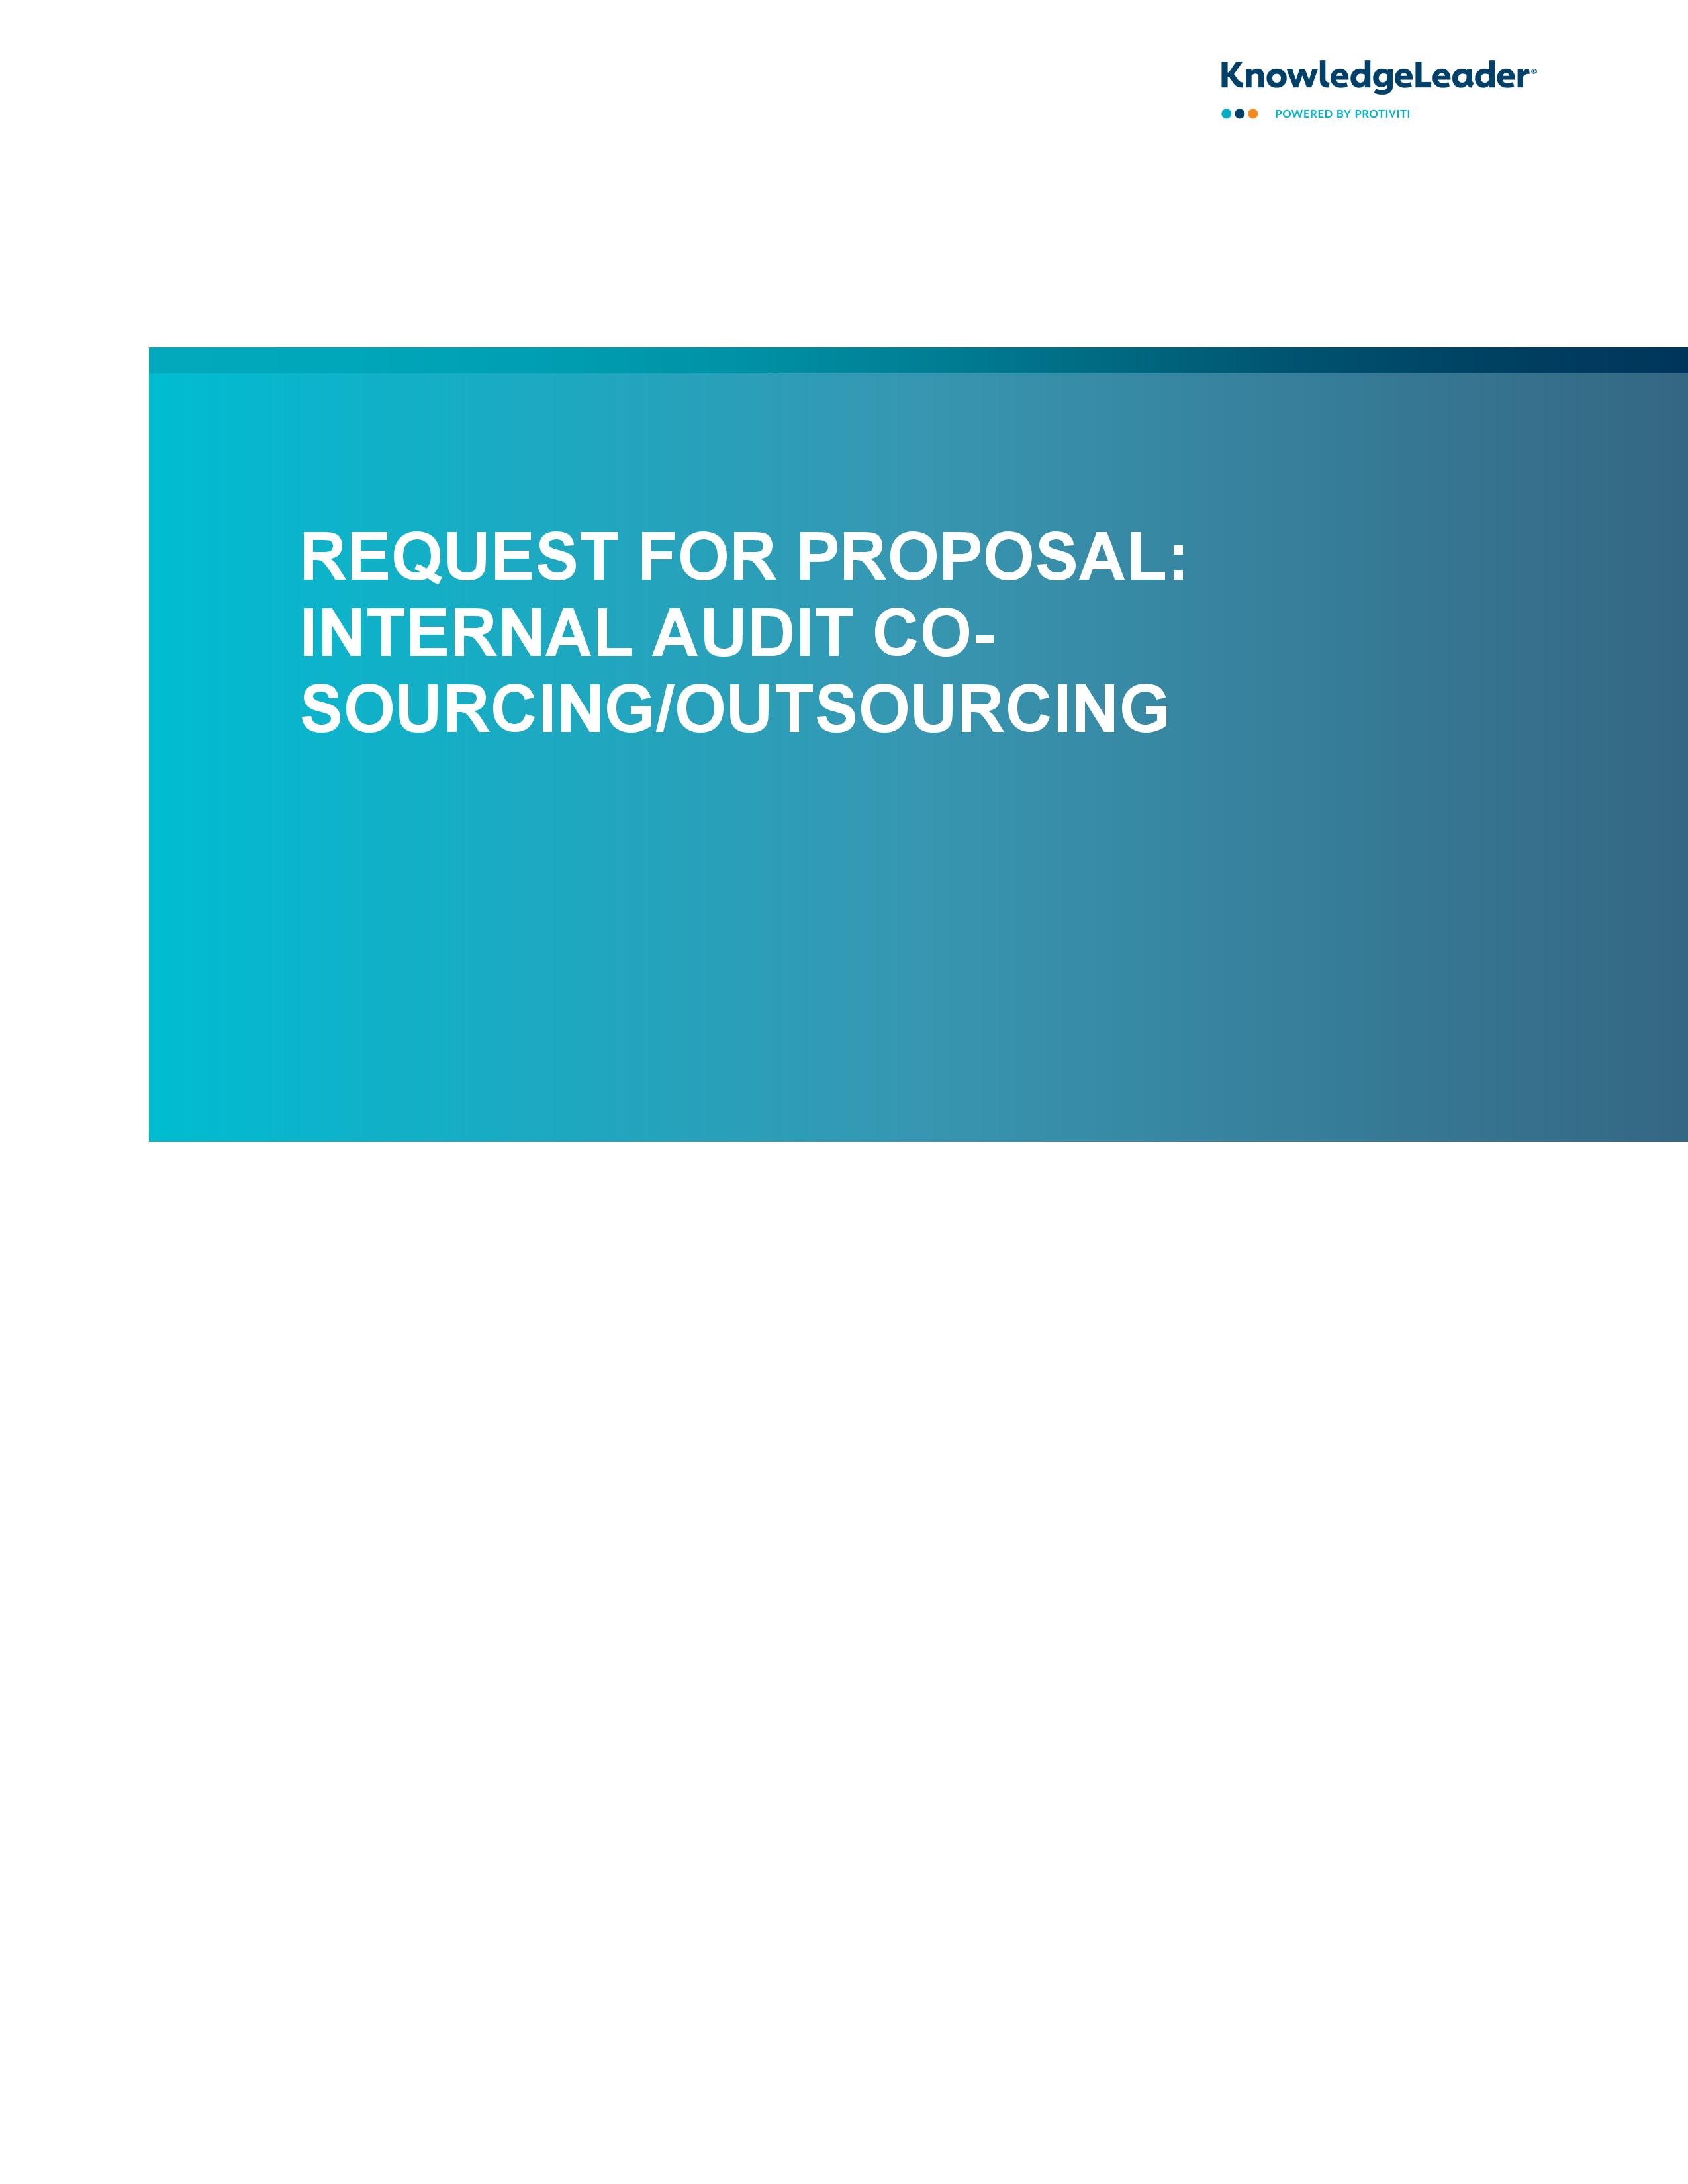 Screenshot of the first page of Request for Proposal Internal Audit Co-Sourcing Outsourcing